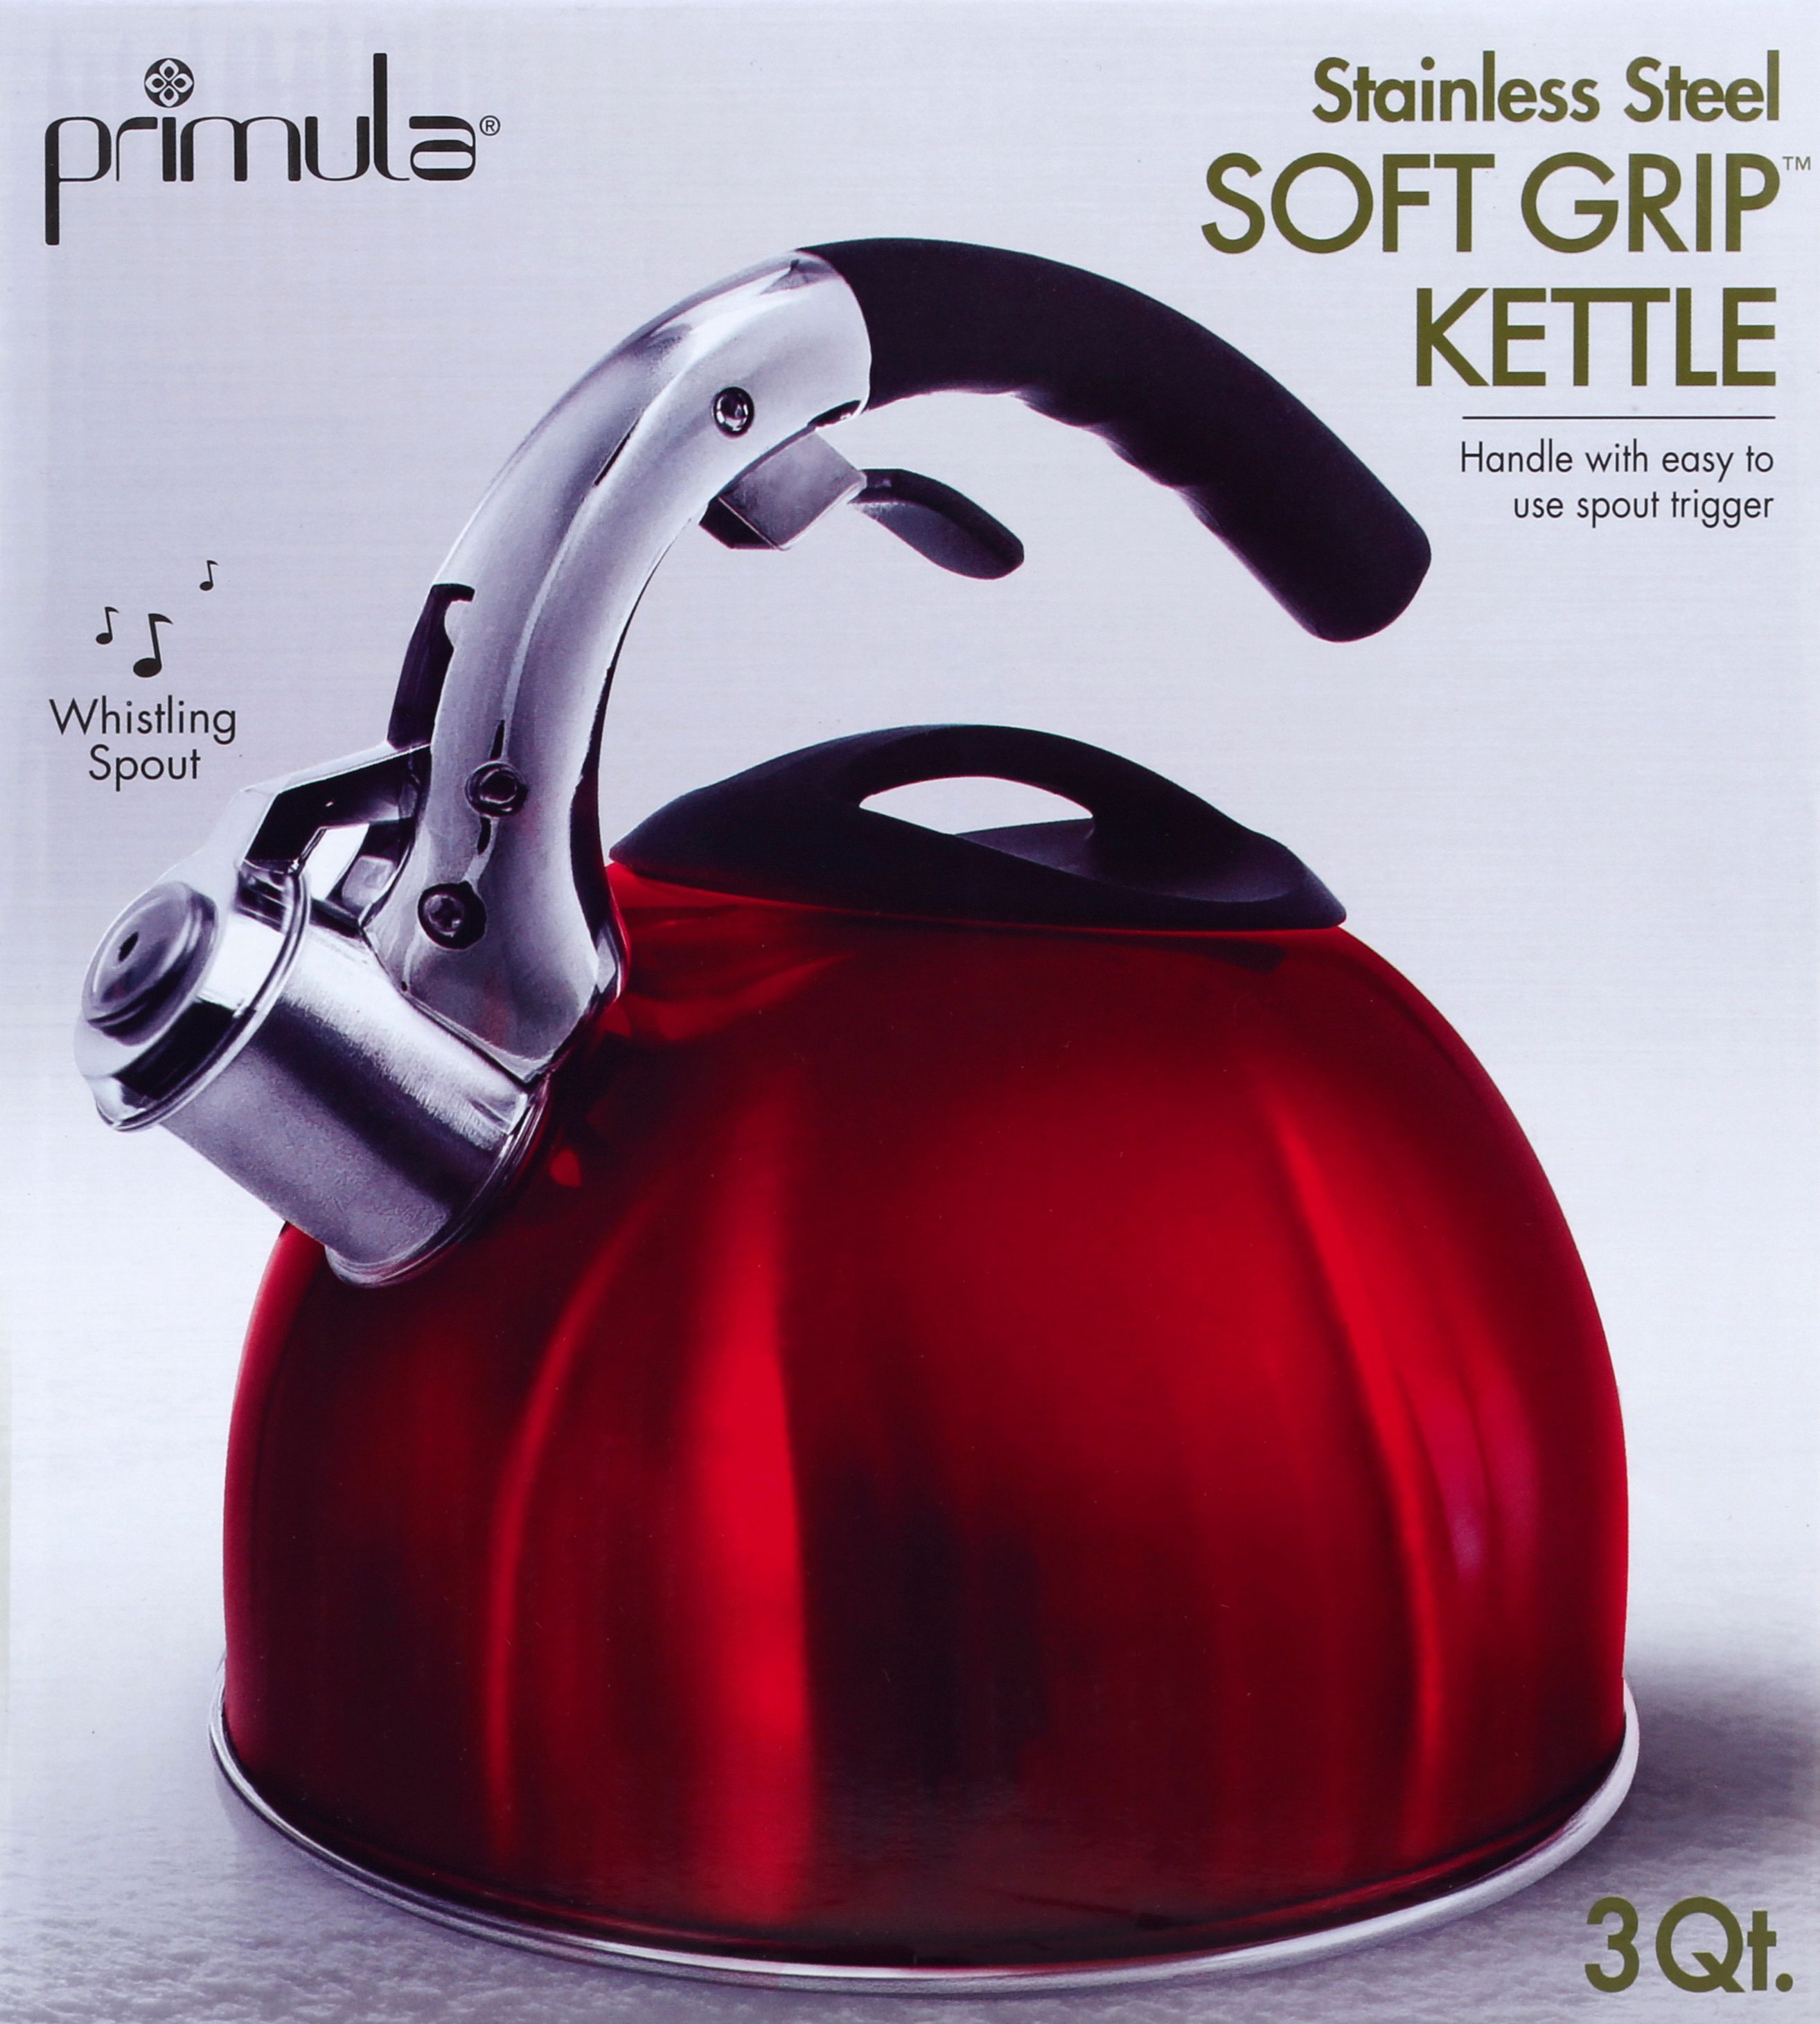 Primula Soft Grip 3 Qt. Stainless Steel Whistling Kettle - Red - image 3 of 8